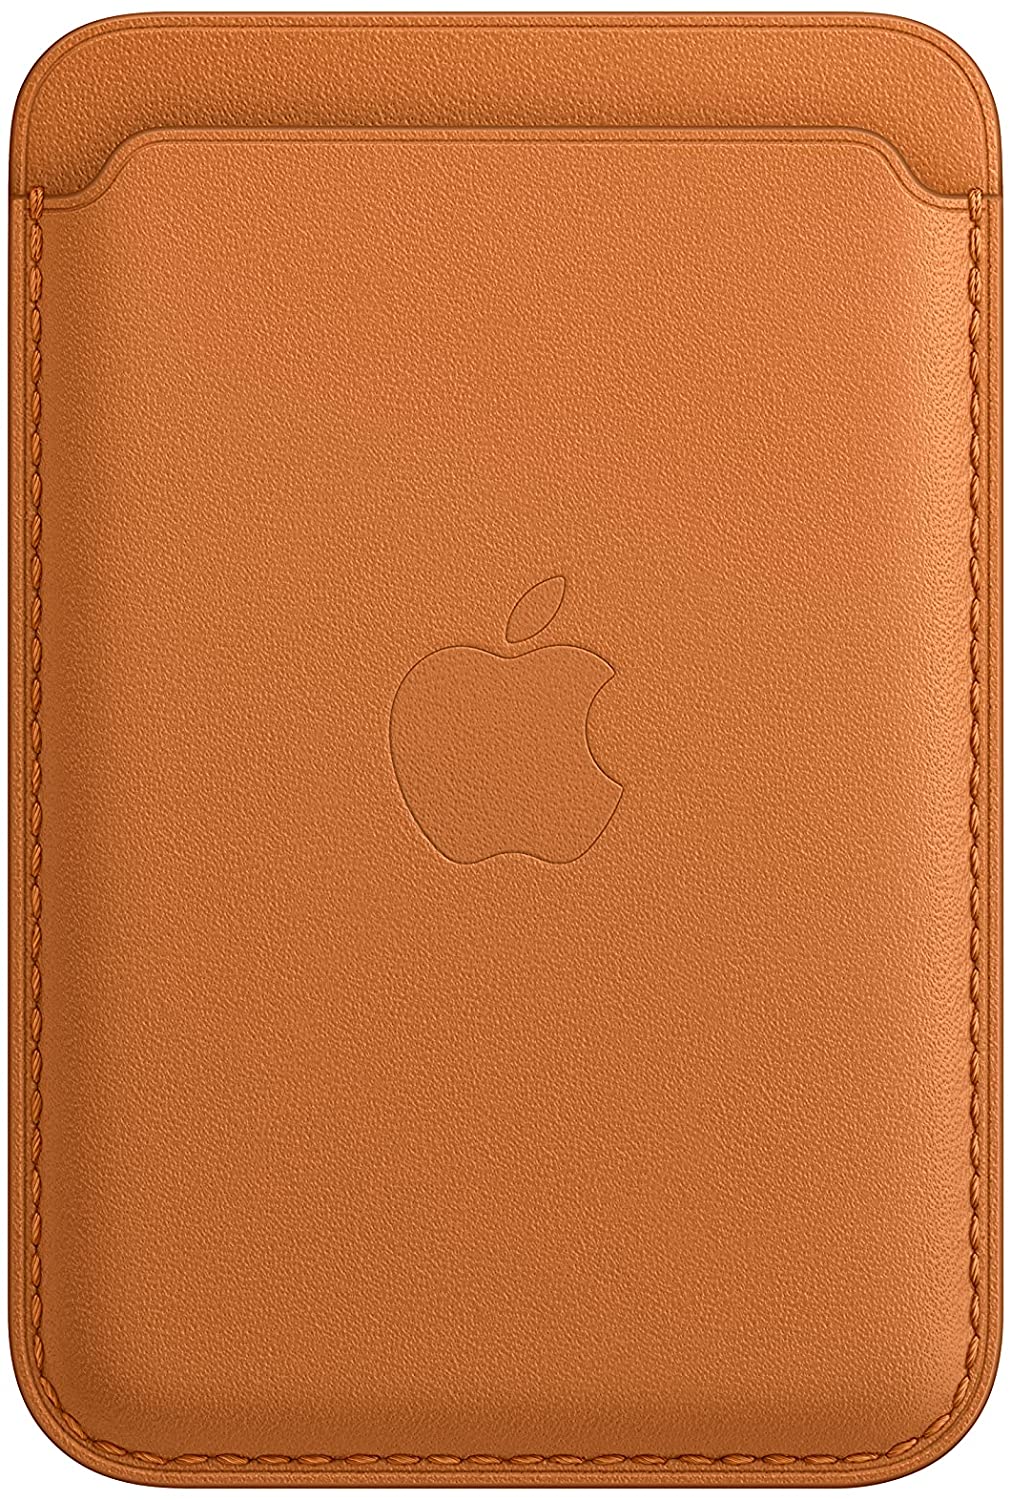 Apple Leather Wallet with MagSafe for iPhone, MM0Q3ZM/A - Golden Brown (Certified Refurbished)